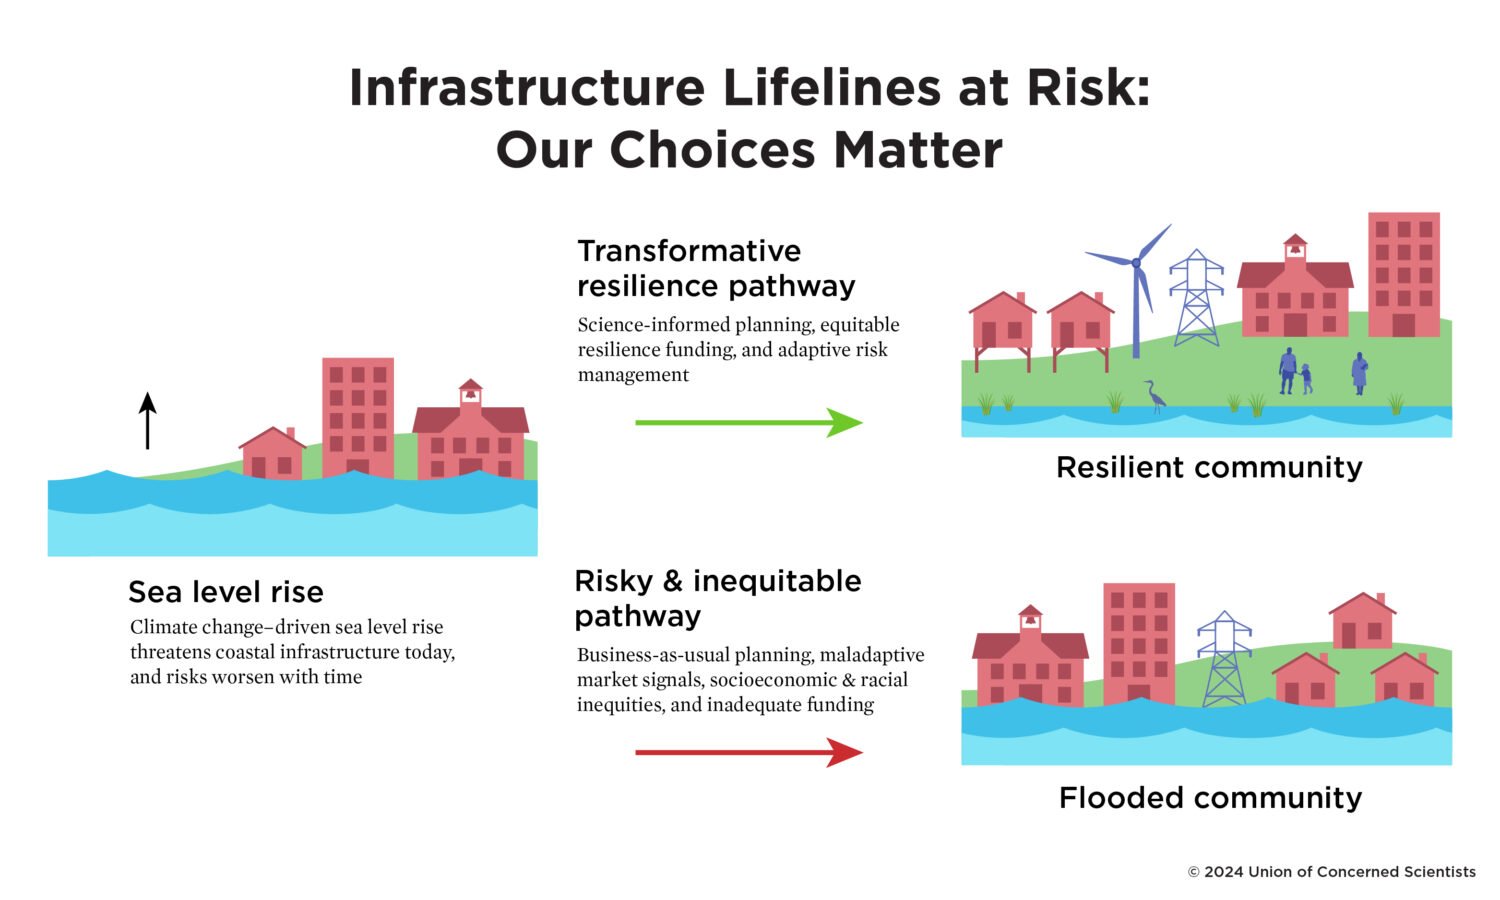 How to Protect Coastal Infrastructure at Risk from Sea Level Rise